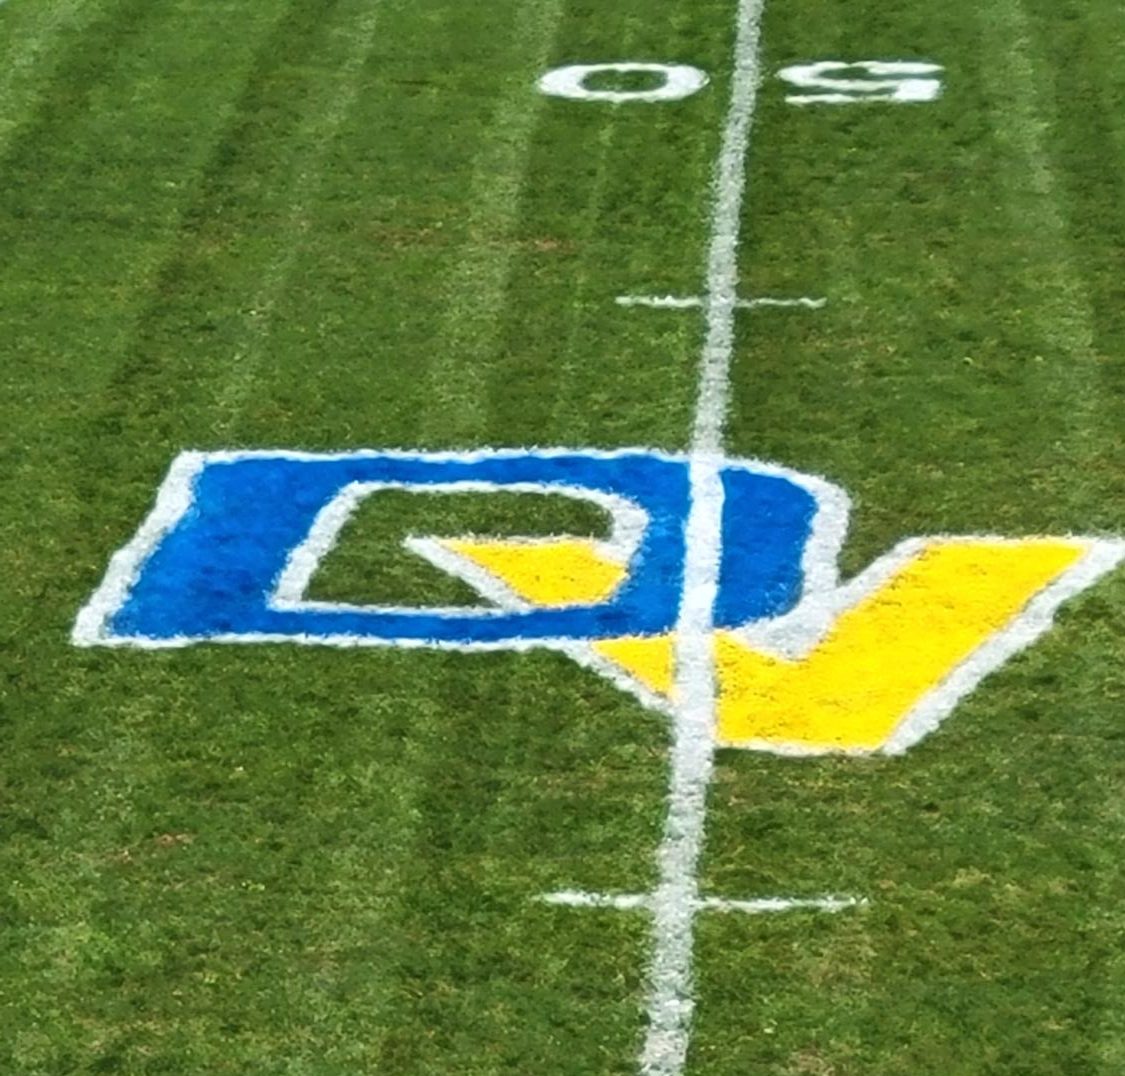 Del+Val%E2%80%99s+grounds+crew+wins+Fields+of+Excellence+award